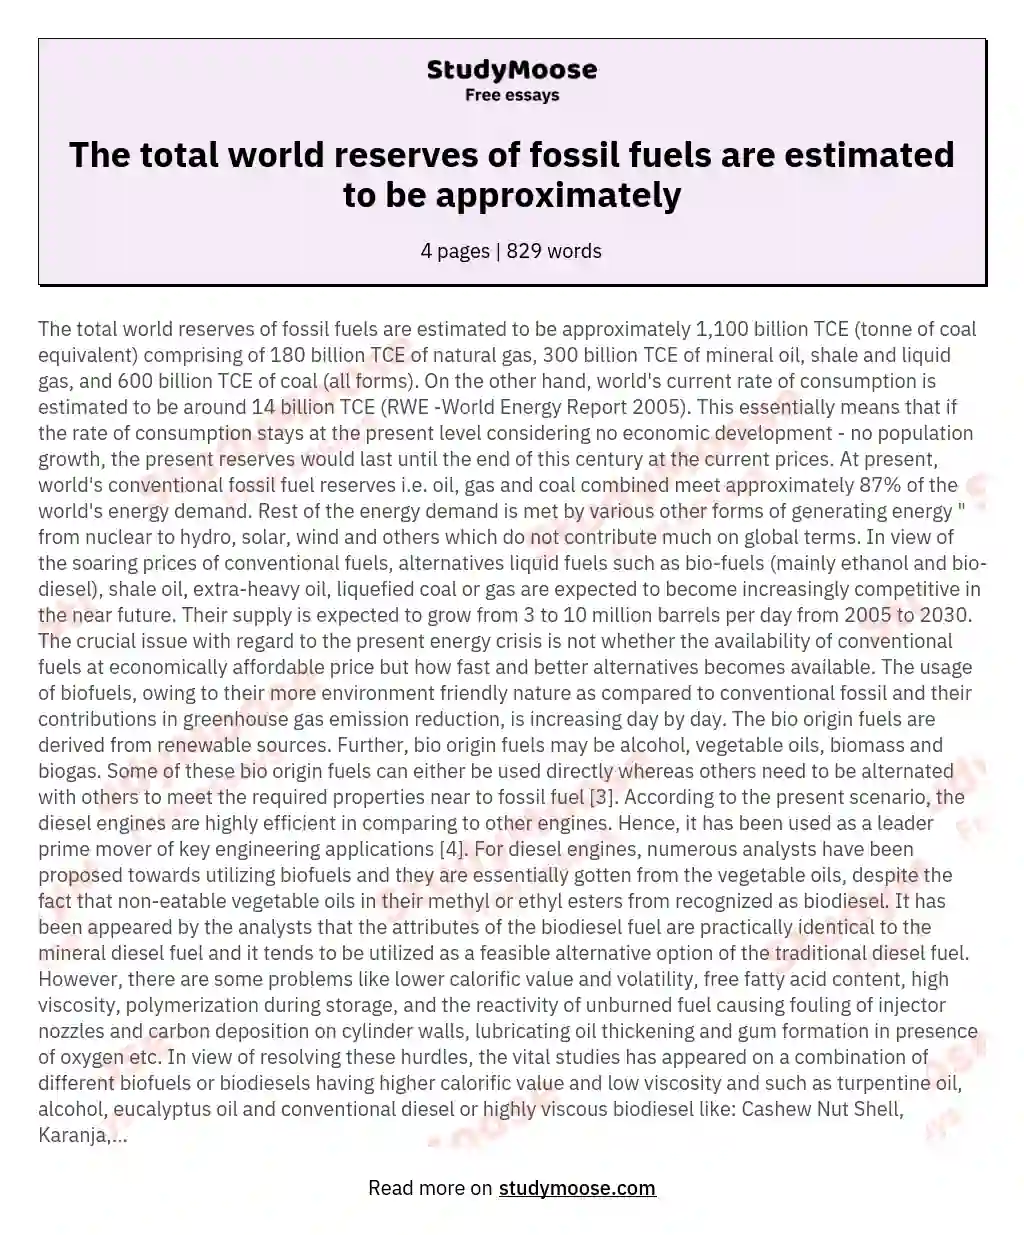 The total world reserves of fossil fuels are estimated to be approximately